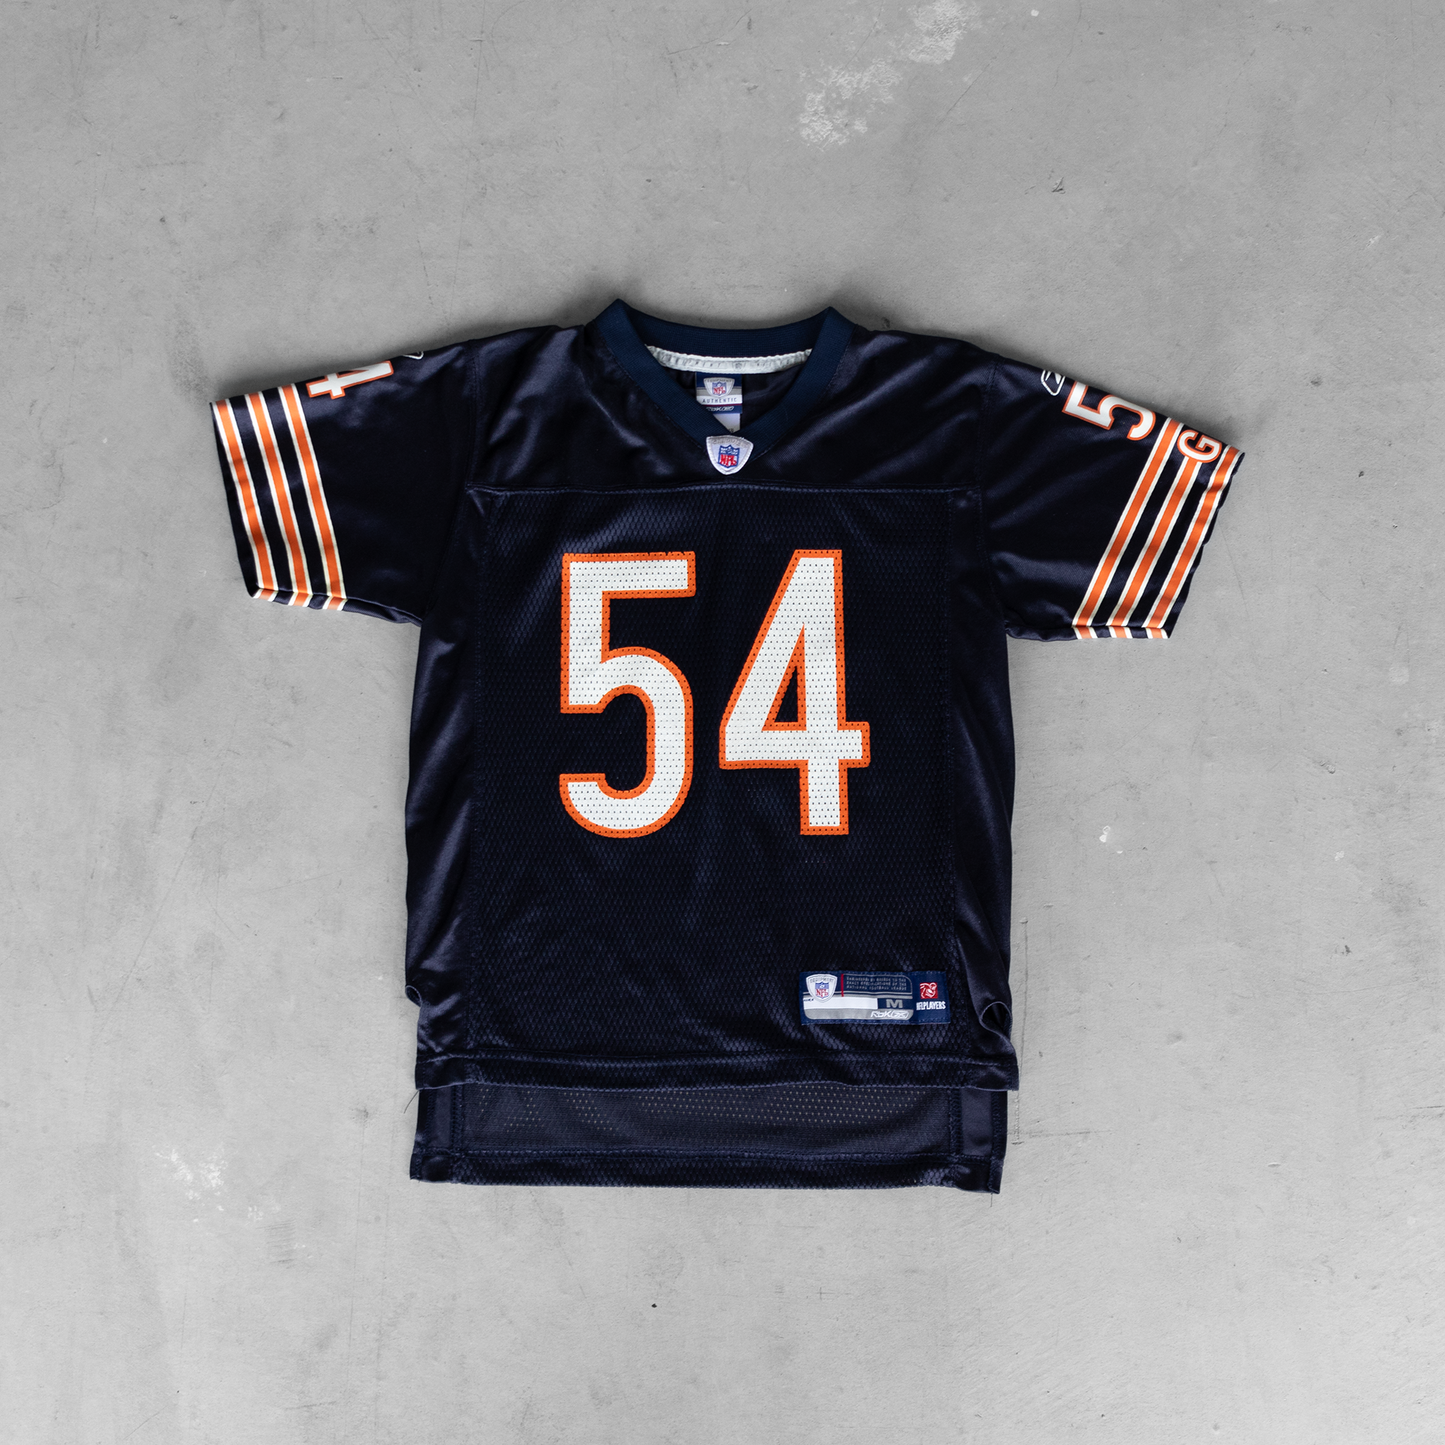 Vintage NFL Chicago Bears Brian Urlacher #54 Youth Football Jersey (M)